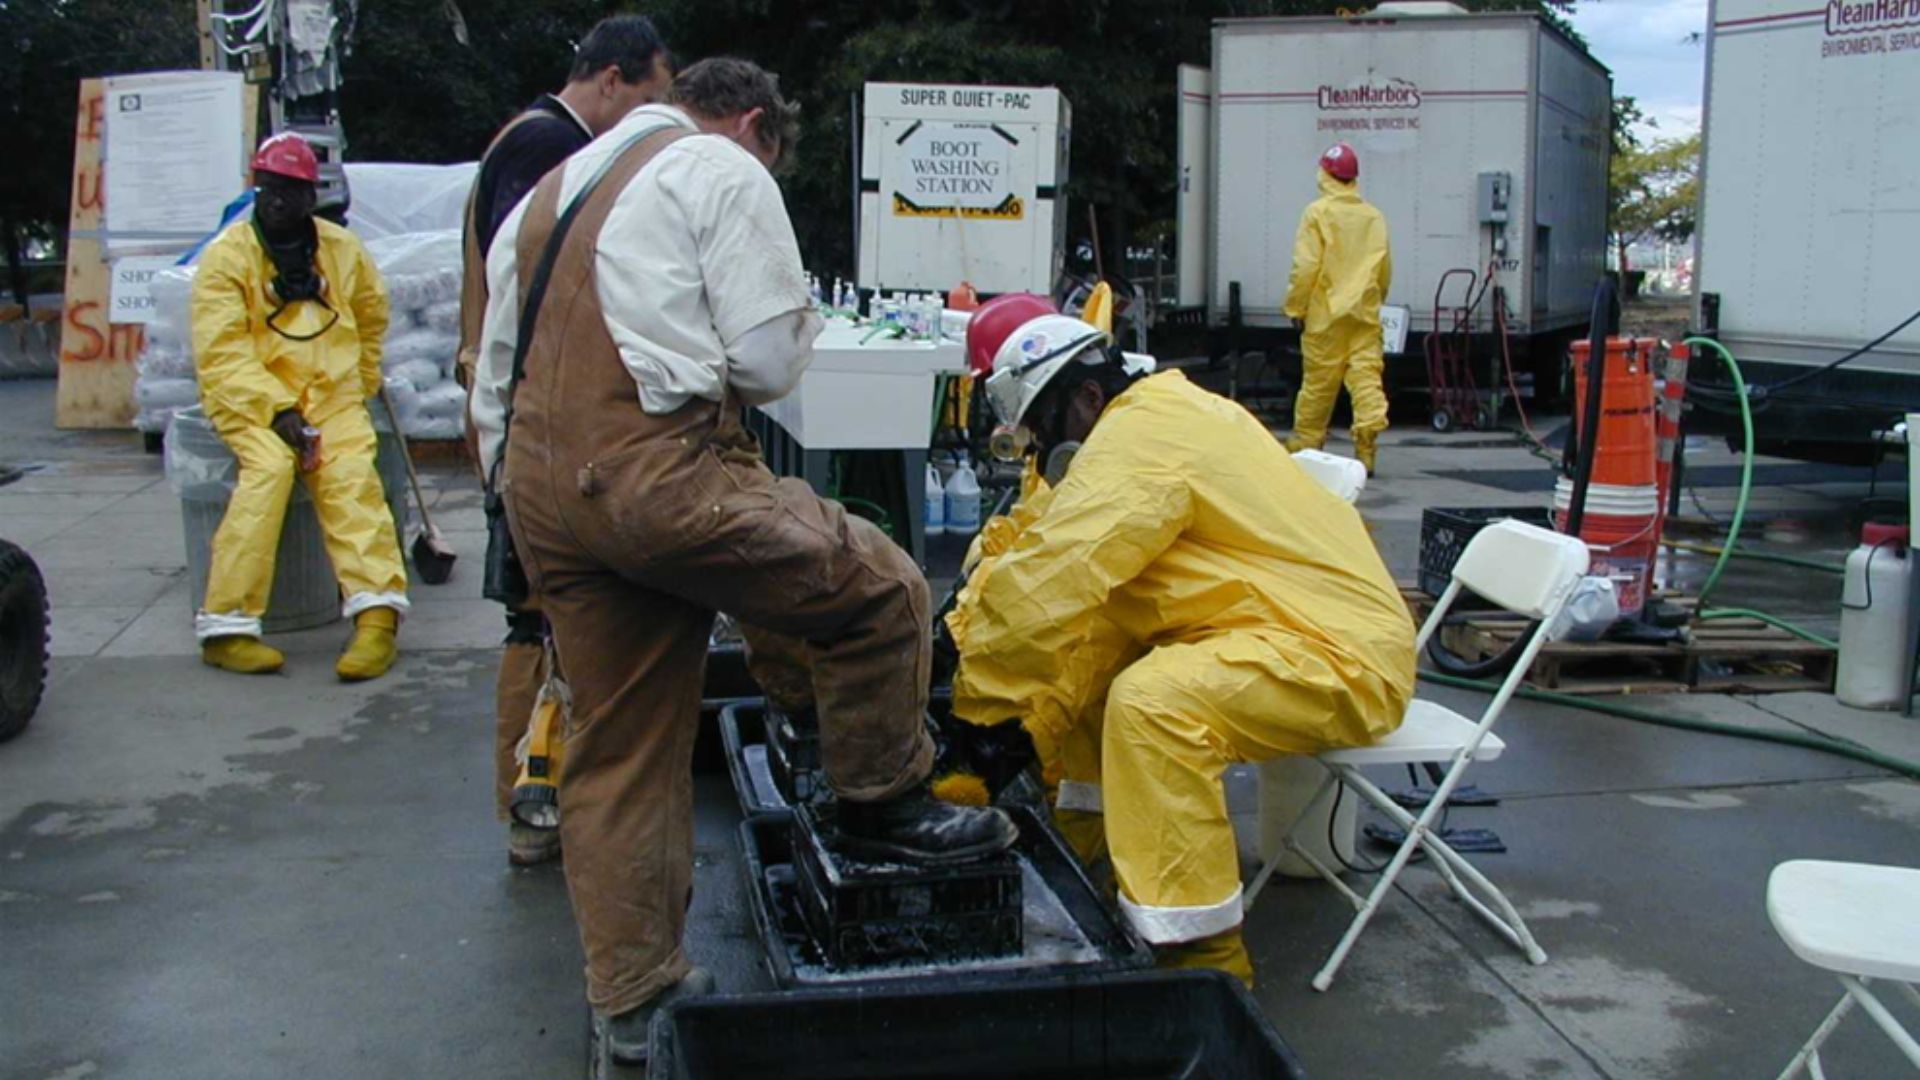 Two workers get their boots washed by two other workers in yellow hazmat uniforms.